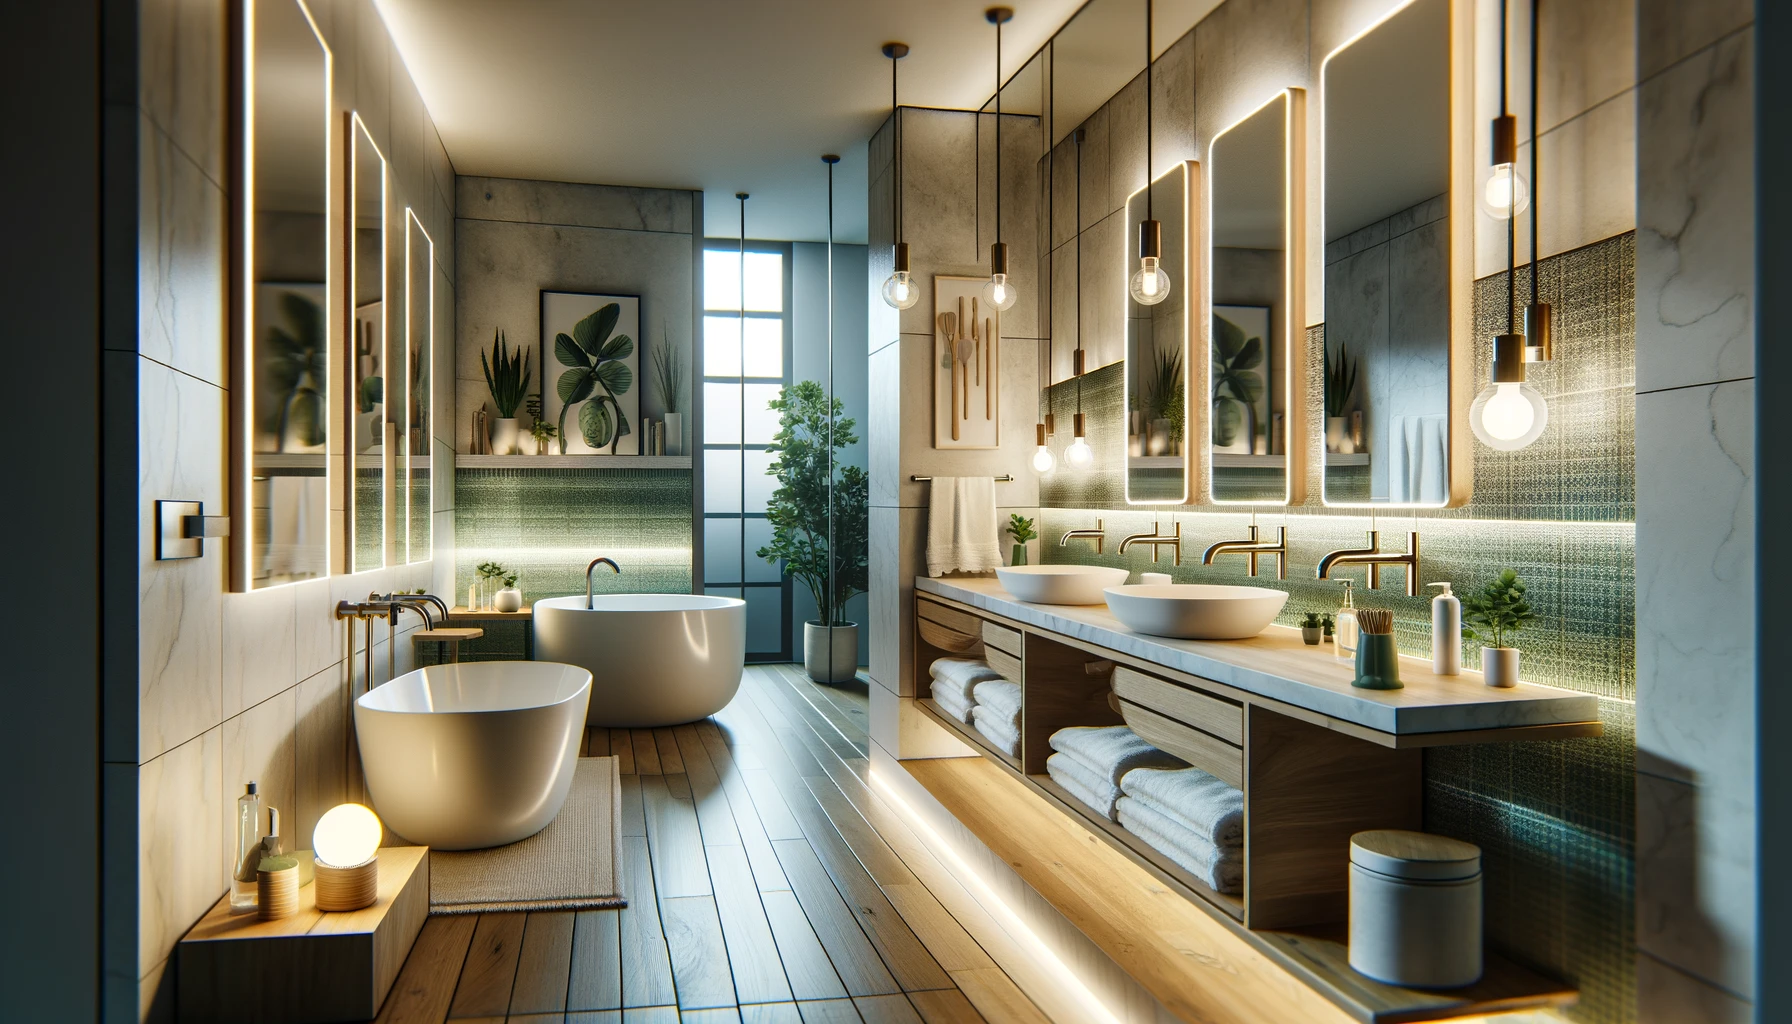 an image of a modern, eco-conscious bathroom that embodies green living principles.